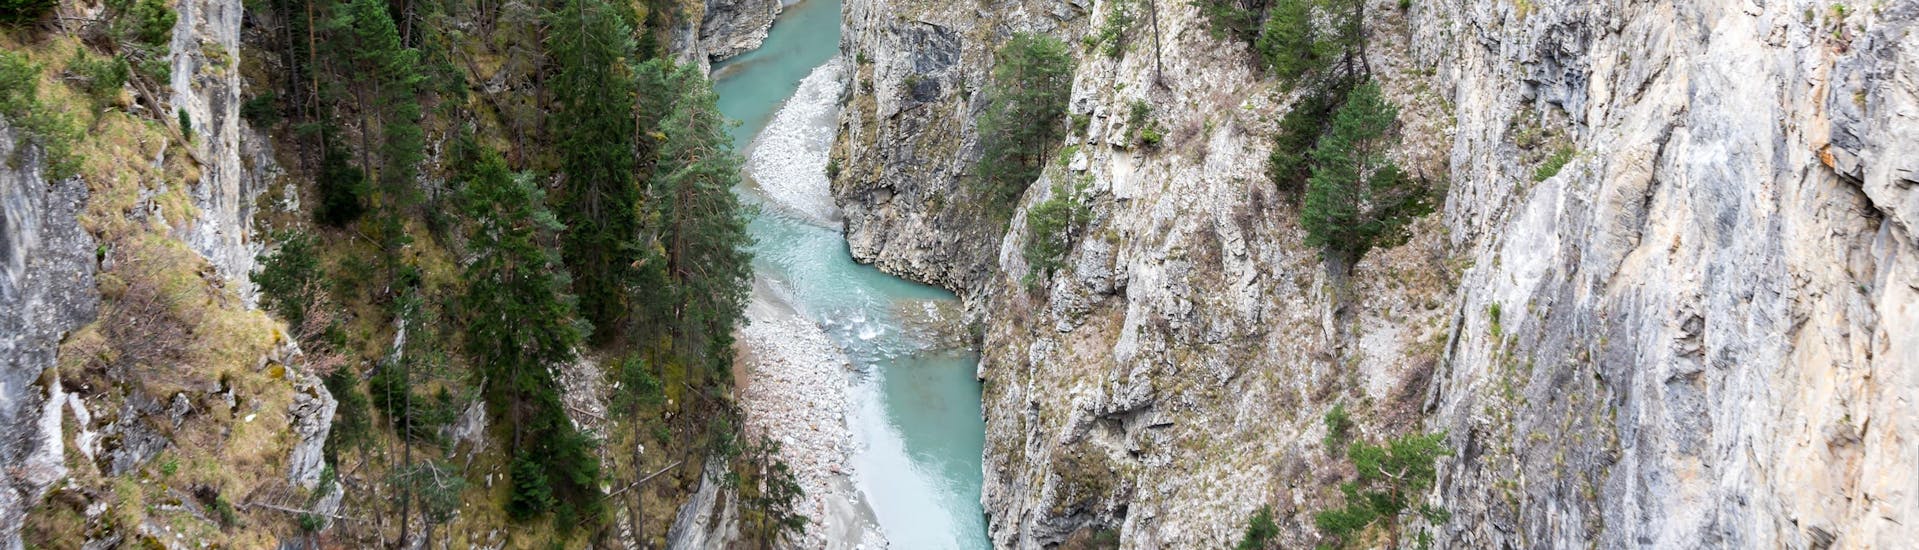 View of a gorge near Talloires in the Annecy area where it is possible to do canyoning.